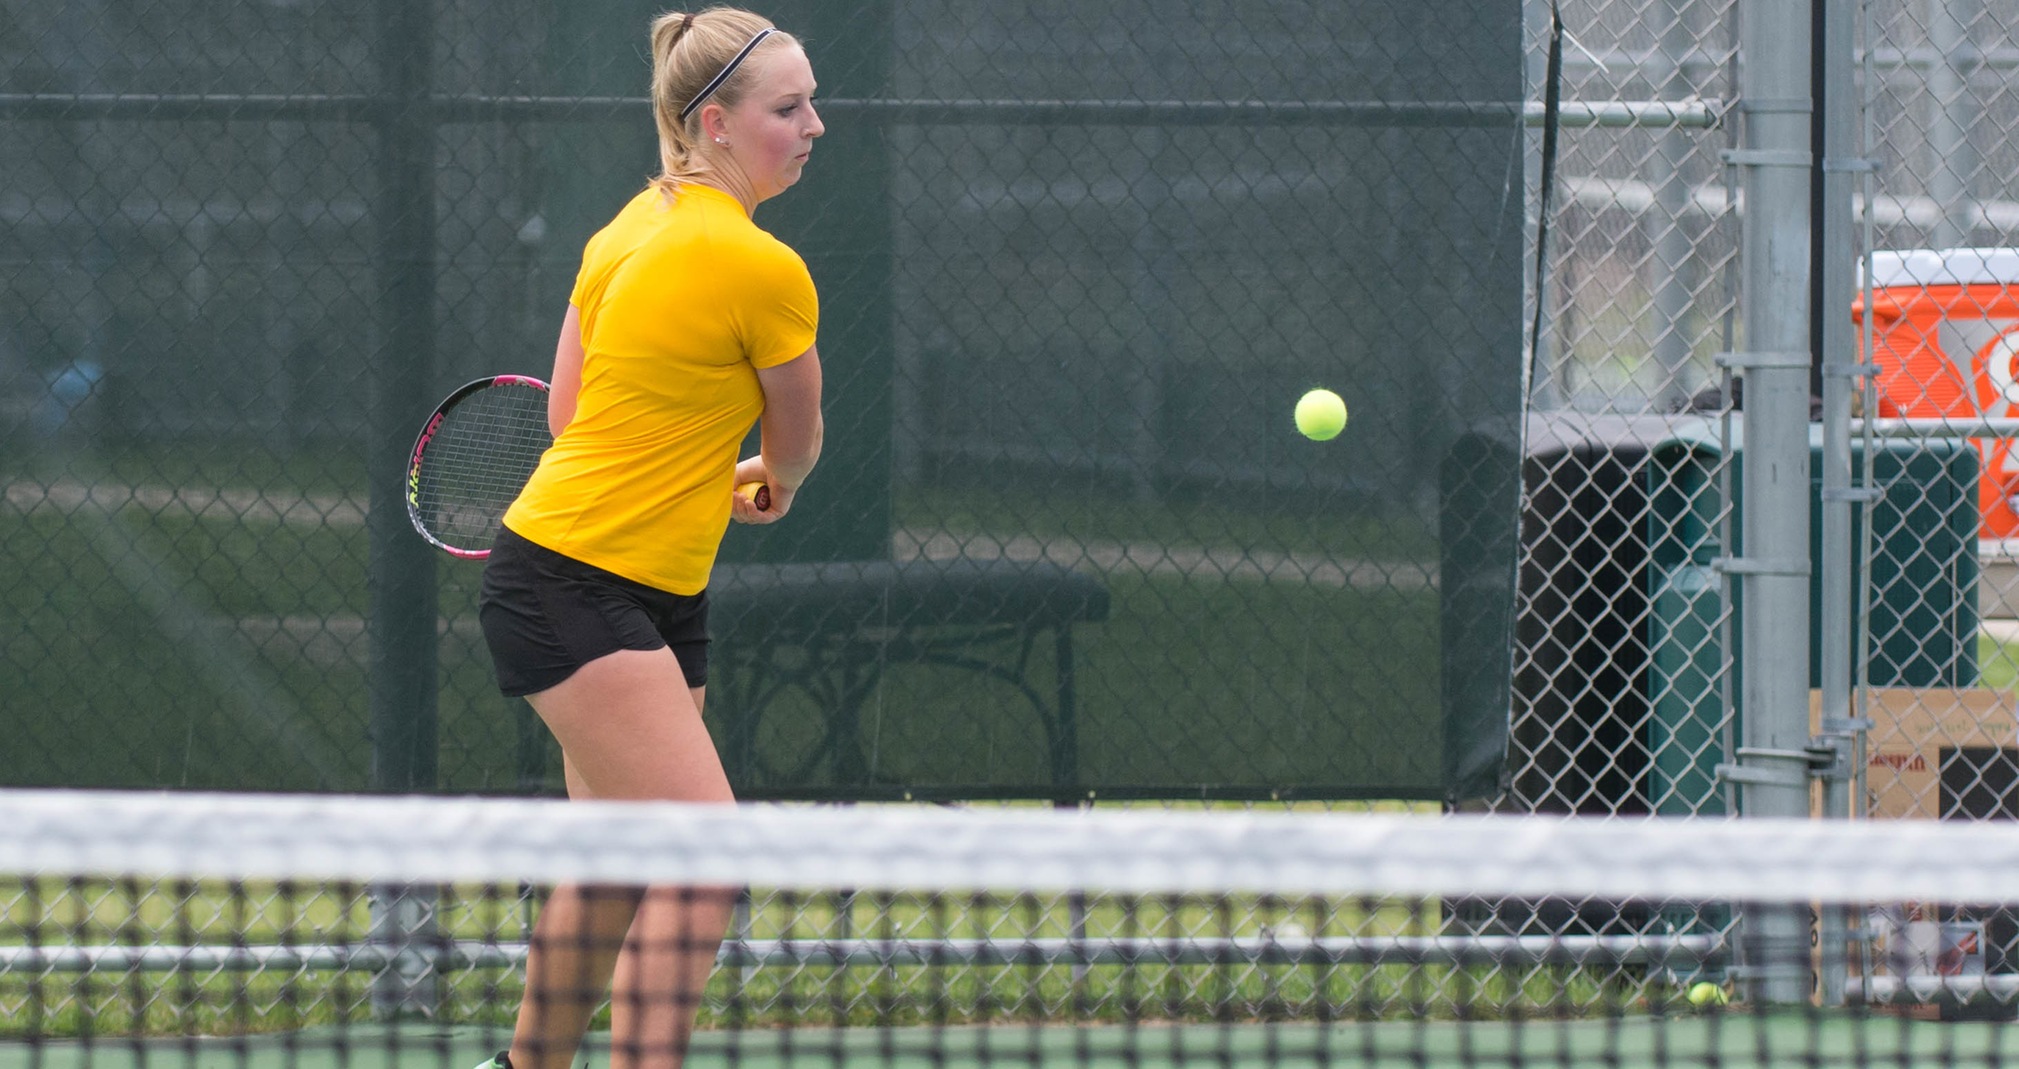 Bailey Sagen led the Titans to a convincing win over Marian University.